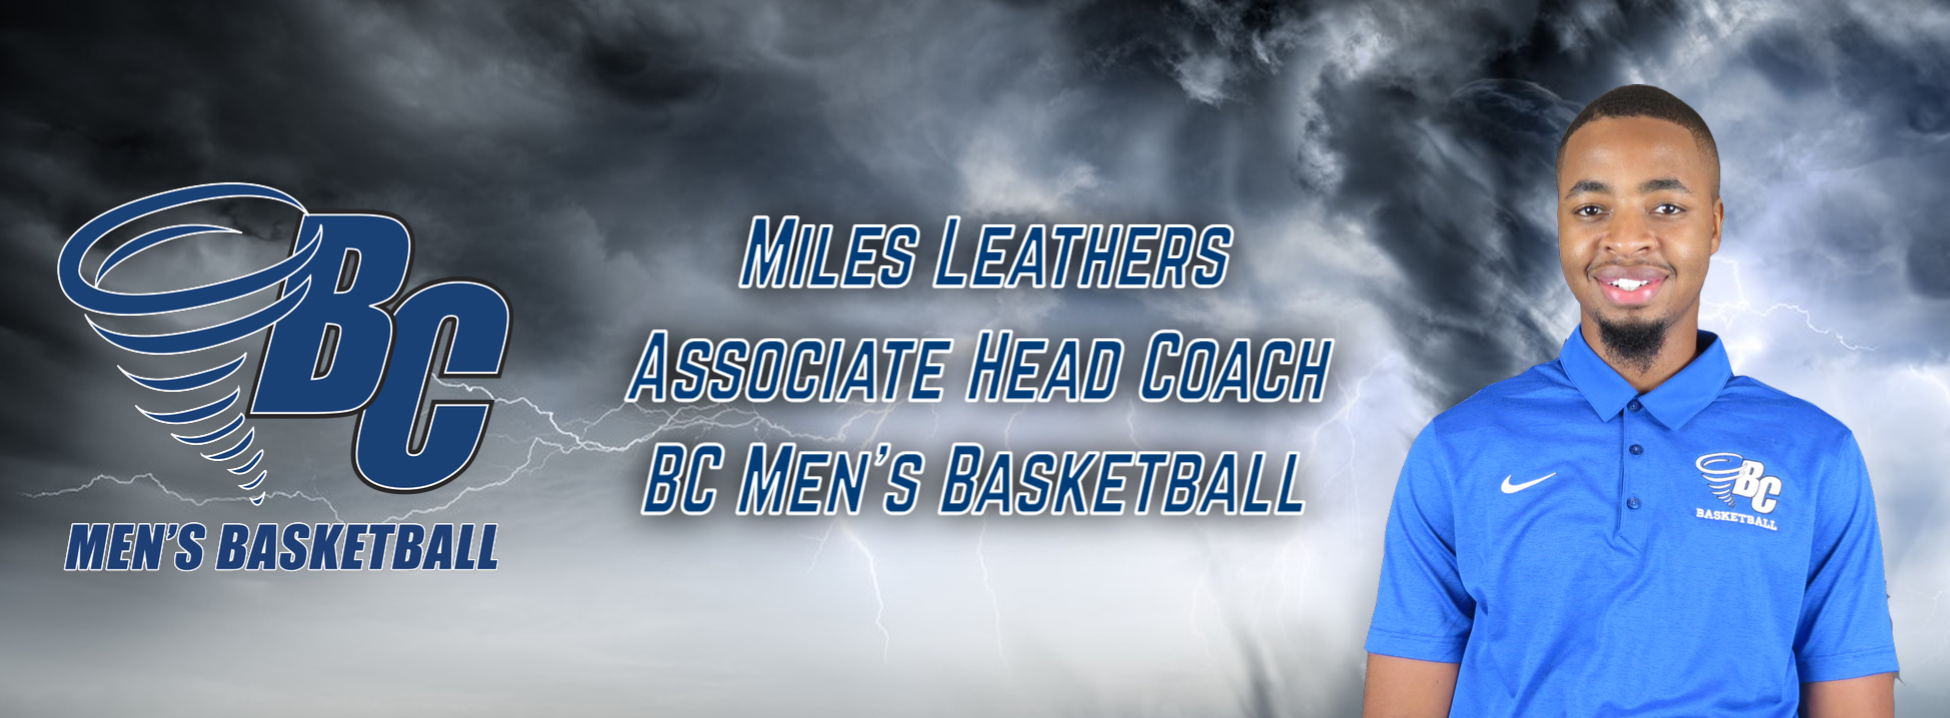 Miles Leathers Elevated to Men’s Basketball Associate Head Coach at Brevard College